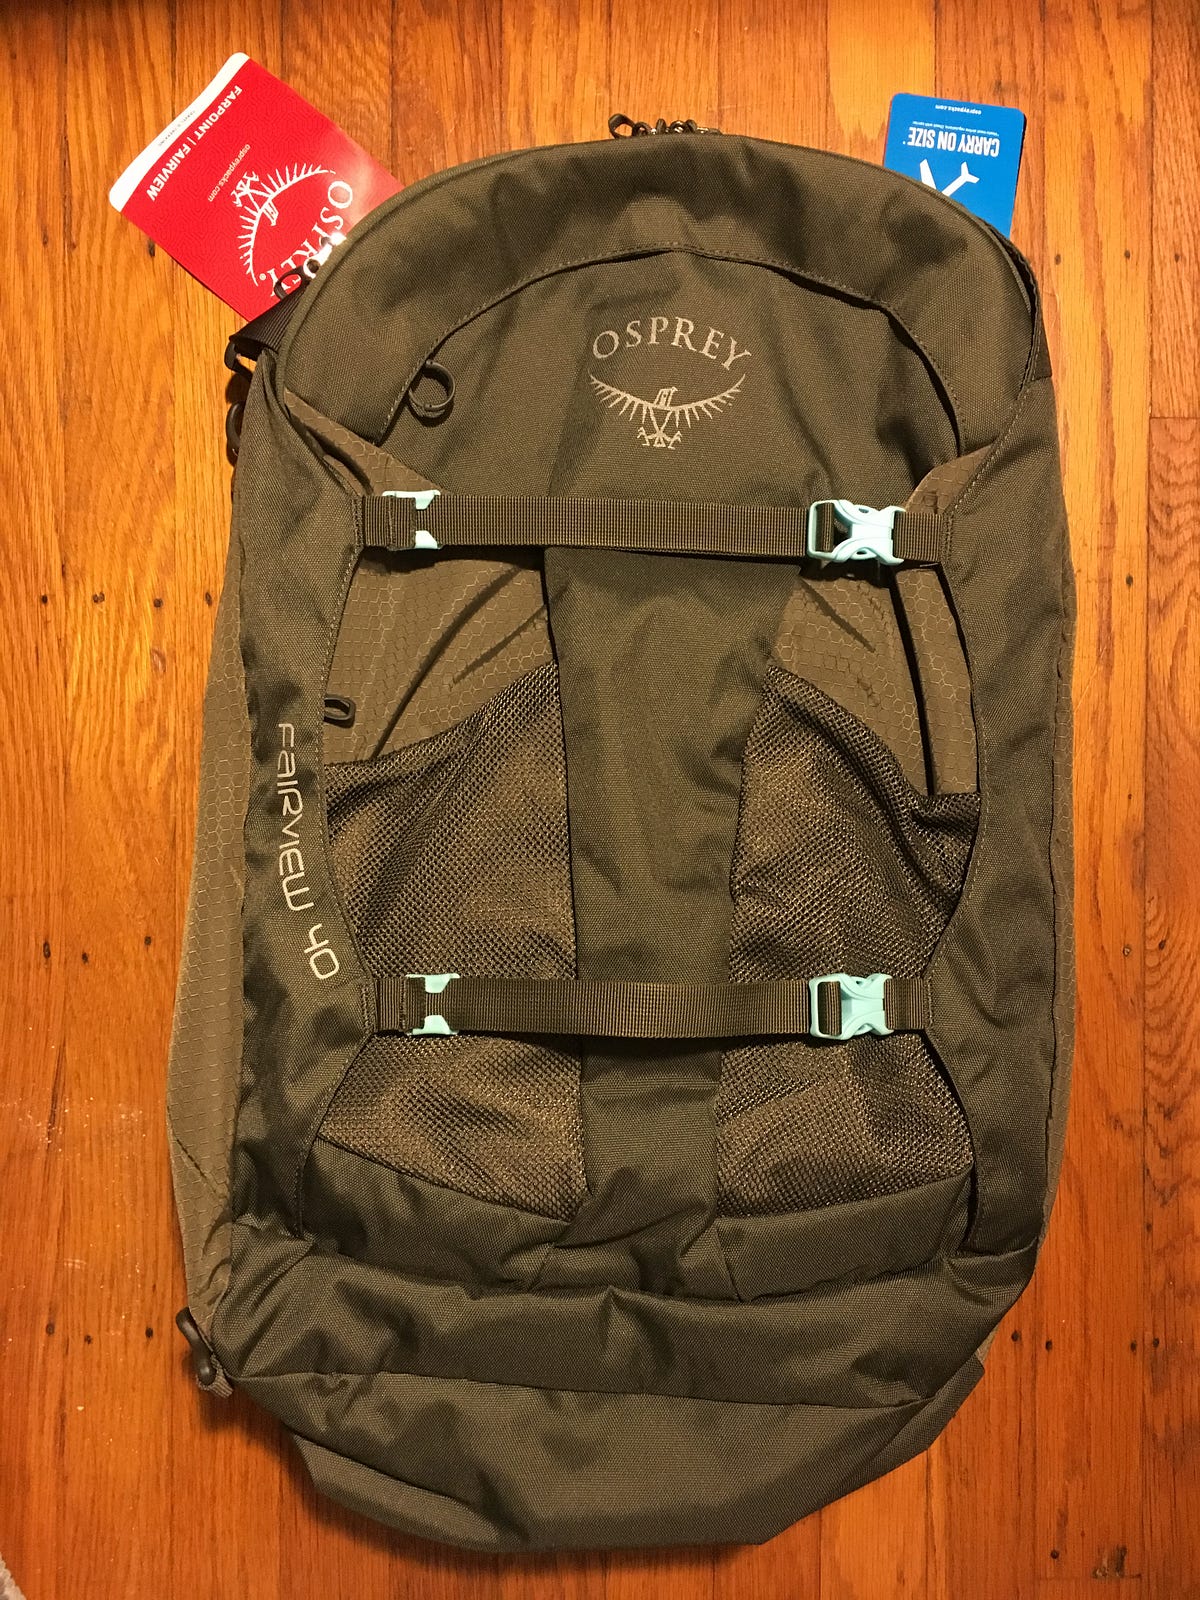 Osprey Fairview 40 Review. I need a bag that allows me flexibility ...